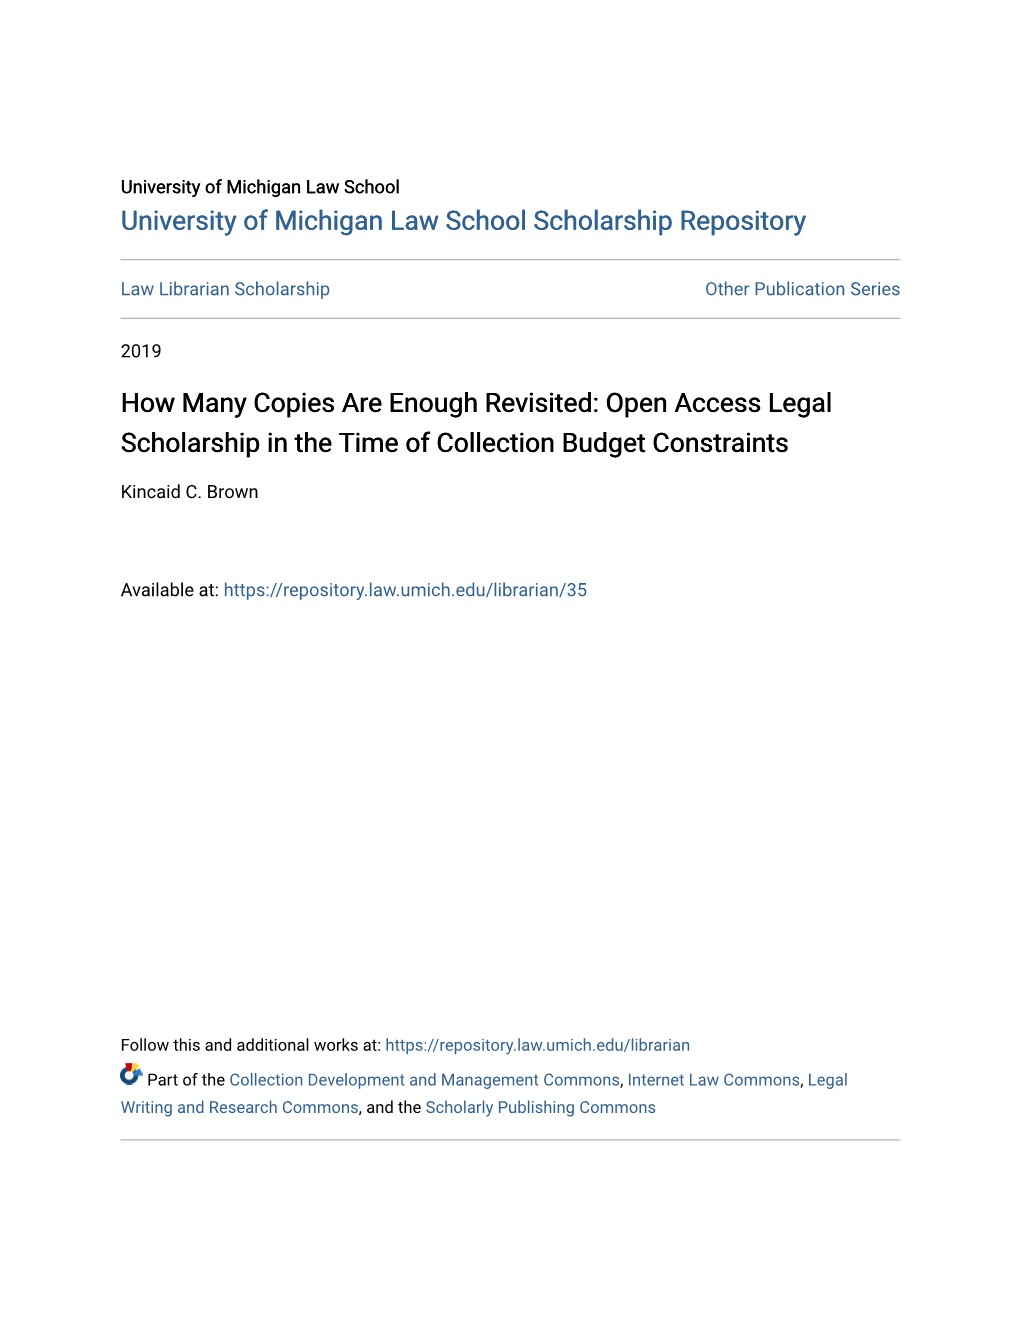 Open Access Legal Scholarship in the Time of Collection Budget Constraints